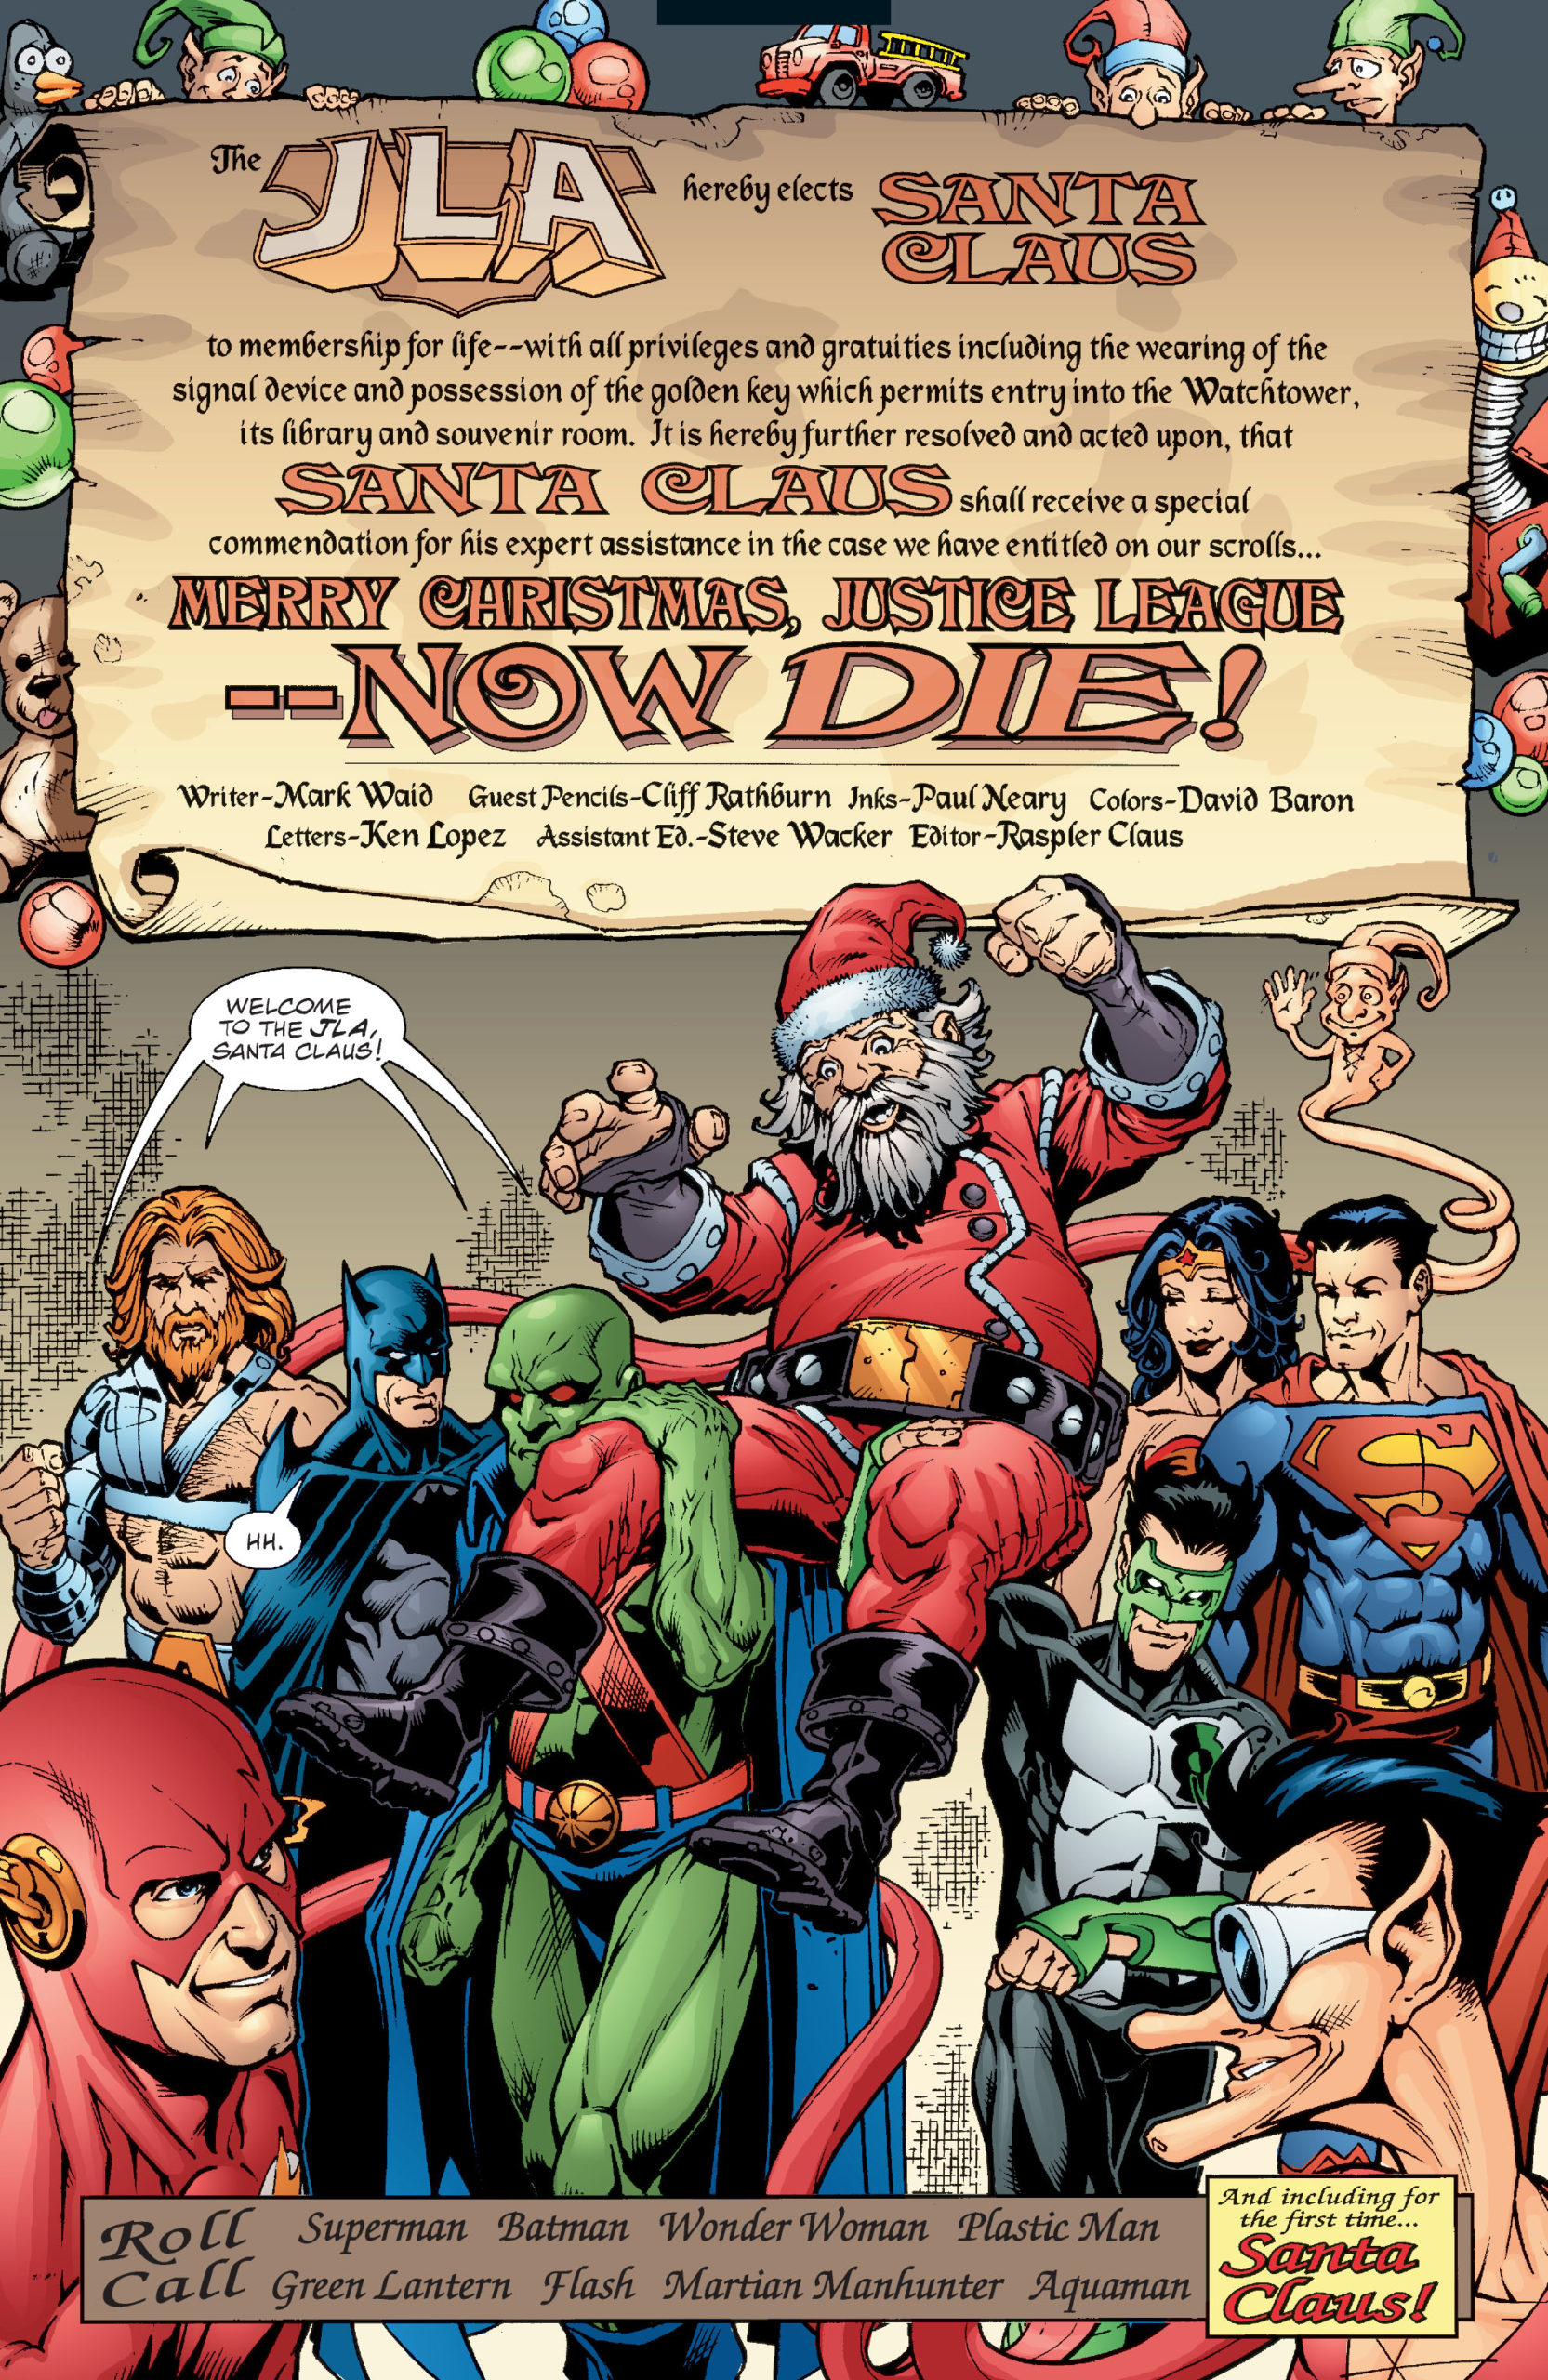 Interior page says, "Merry Christmas, Justice League -- NOW DIE!" The JLA members all carry Santa Claus in celebration.